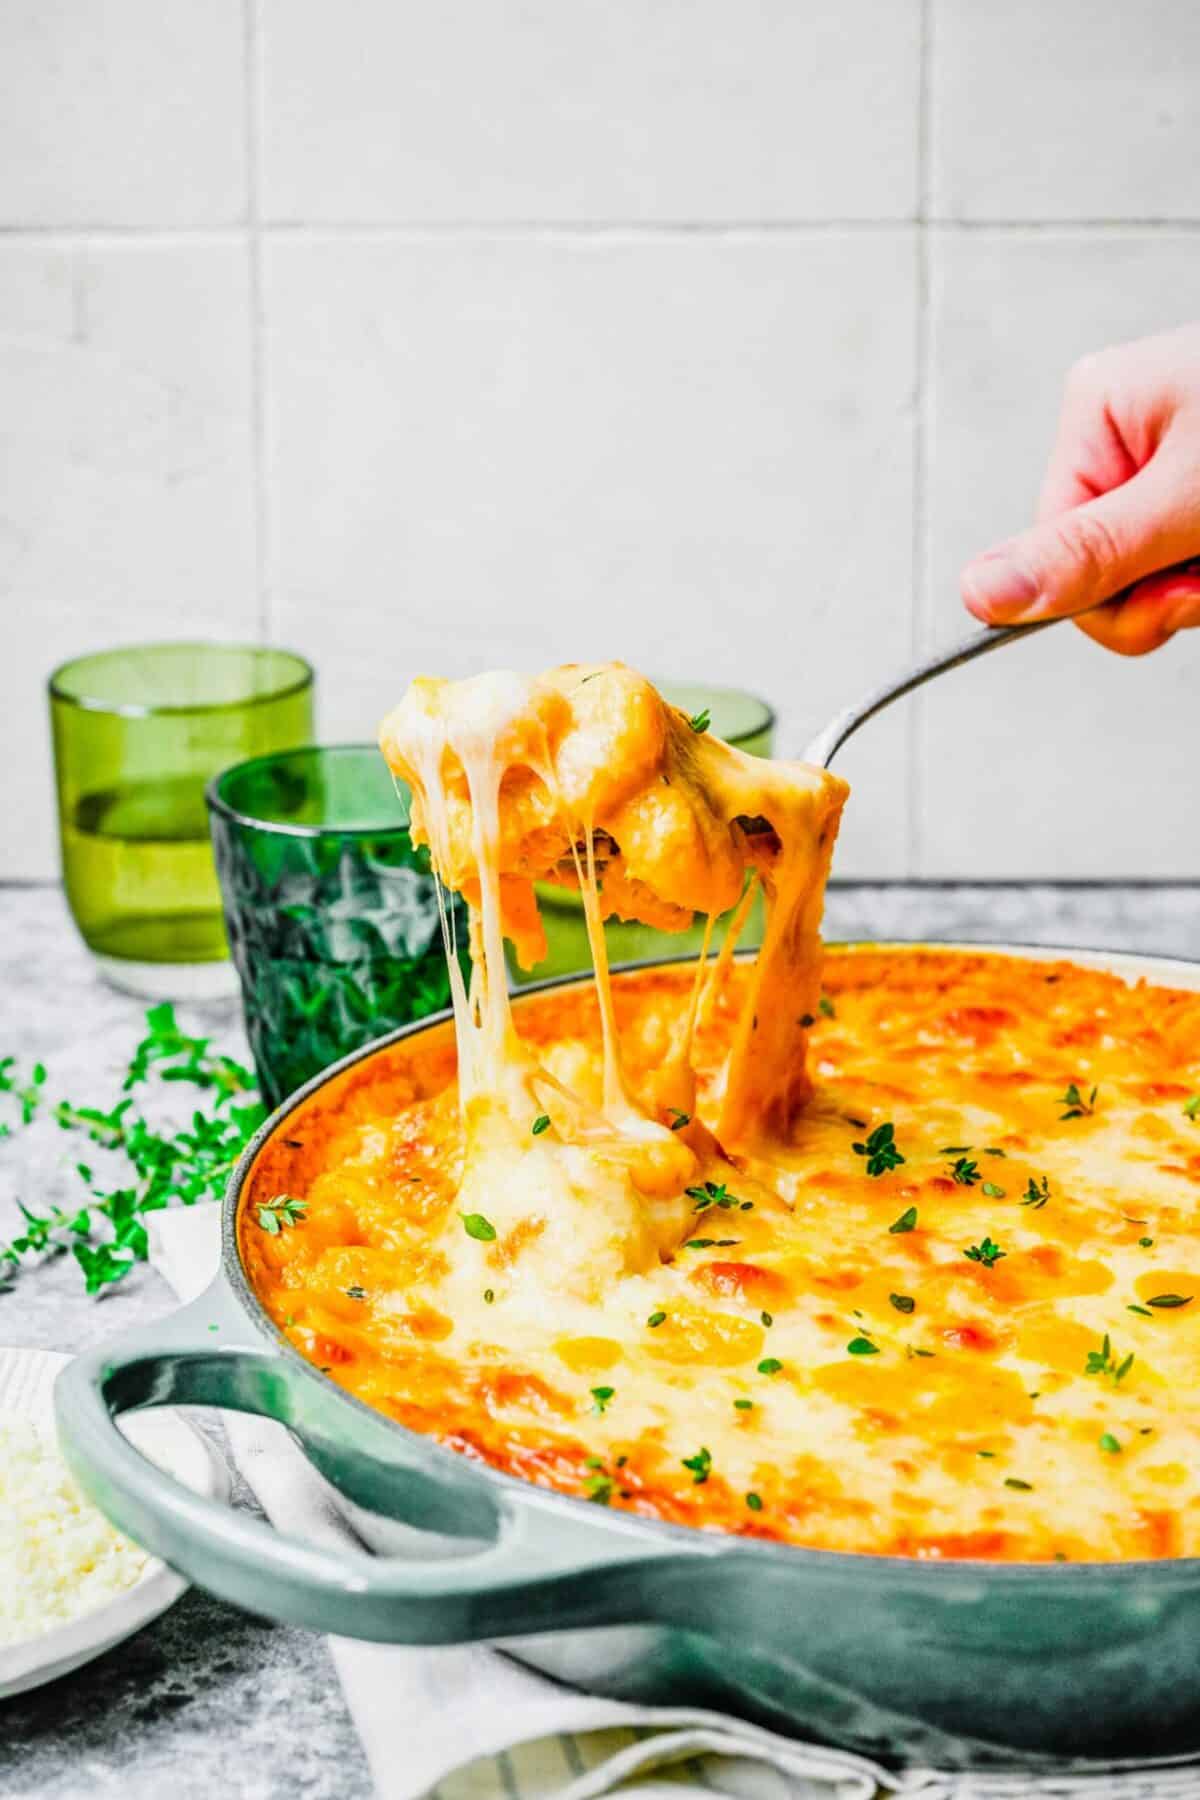 Baked pumpkin gnocchi in a pan, garnished with fresh thyme, with a serving spoon pulling a spoonful out as the cheese stretches, with water glasses in the background